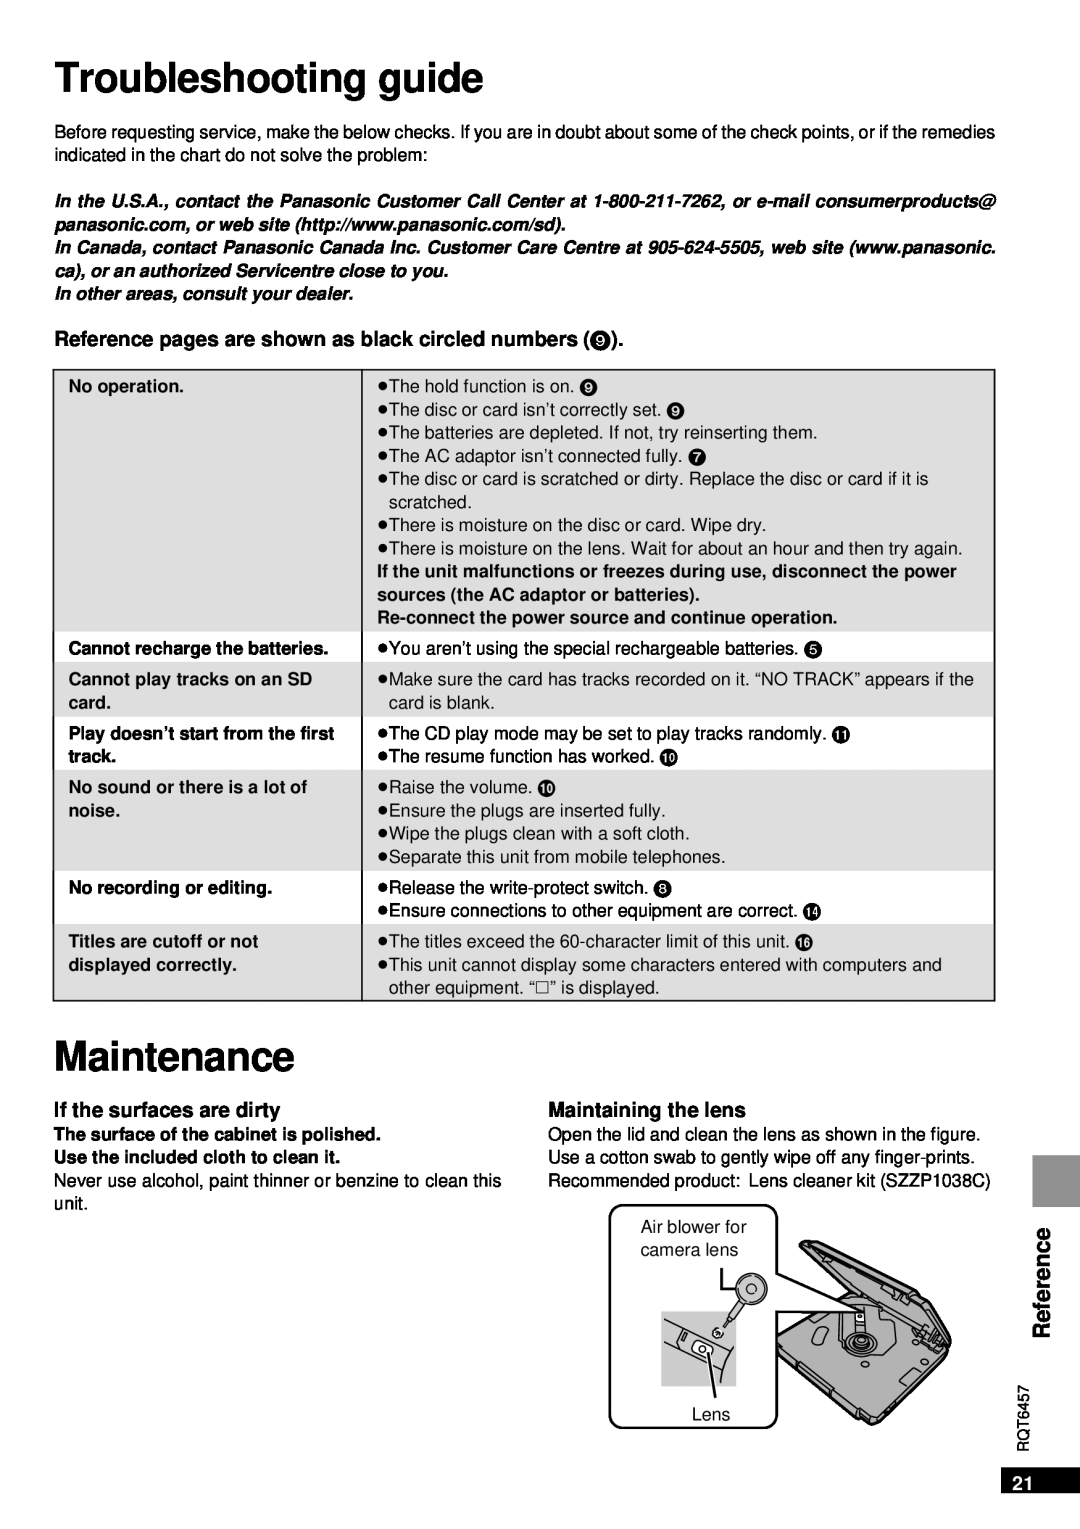 Panasonic SV-SR100 operating instructions Maintenance, If the surfaces are dirty, Maintaining the lens 